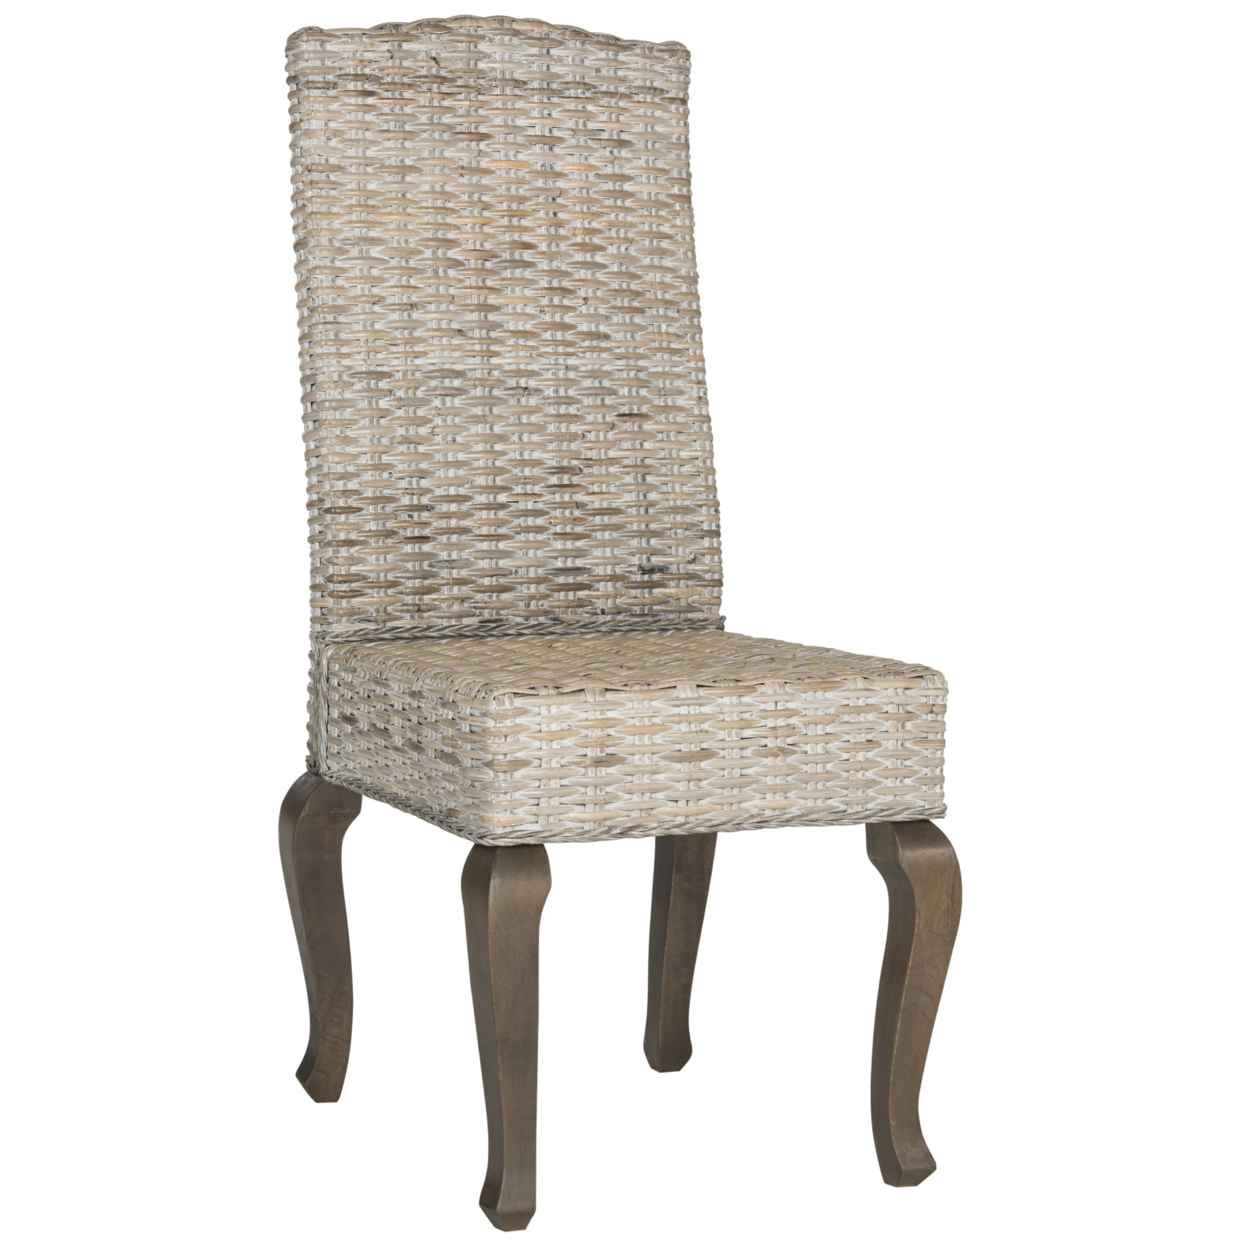 SAFAVIEH Milos 18''H Wicker Dining Chair White Washed